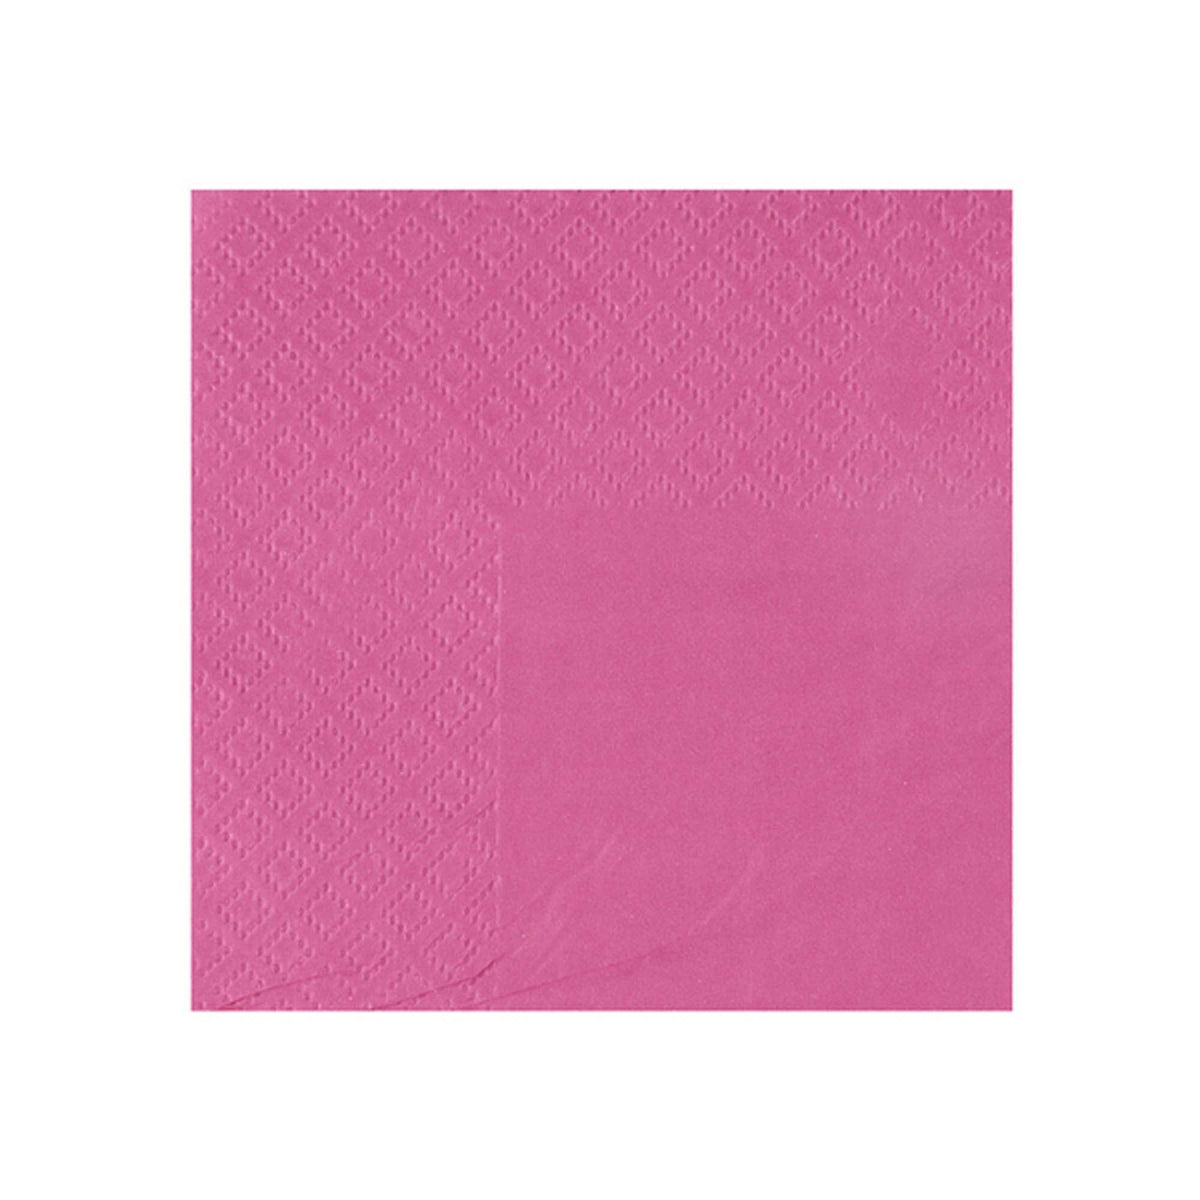 SANTEX Everyday Entertaining Candy Pink Small Beverage Napkins, 25 Count 3660380078791